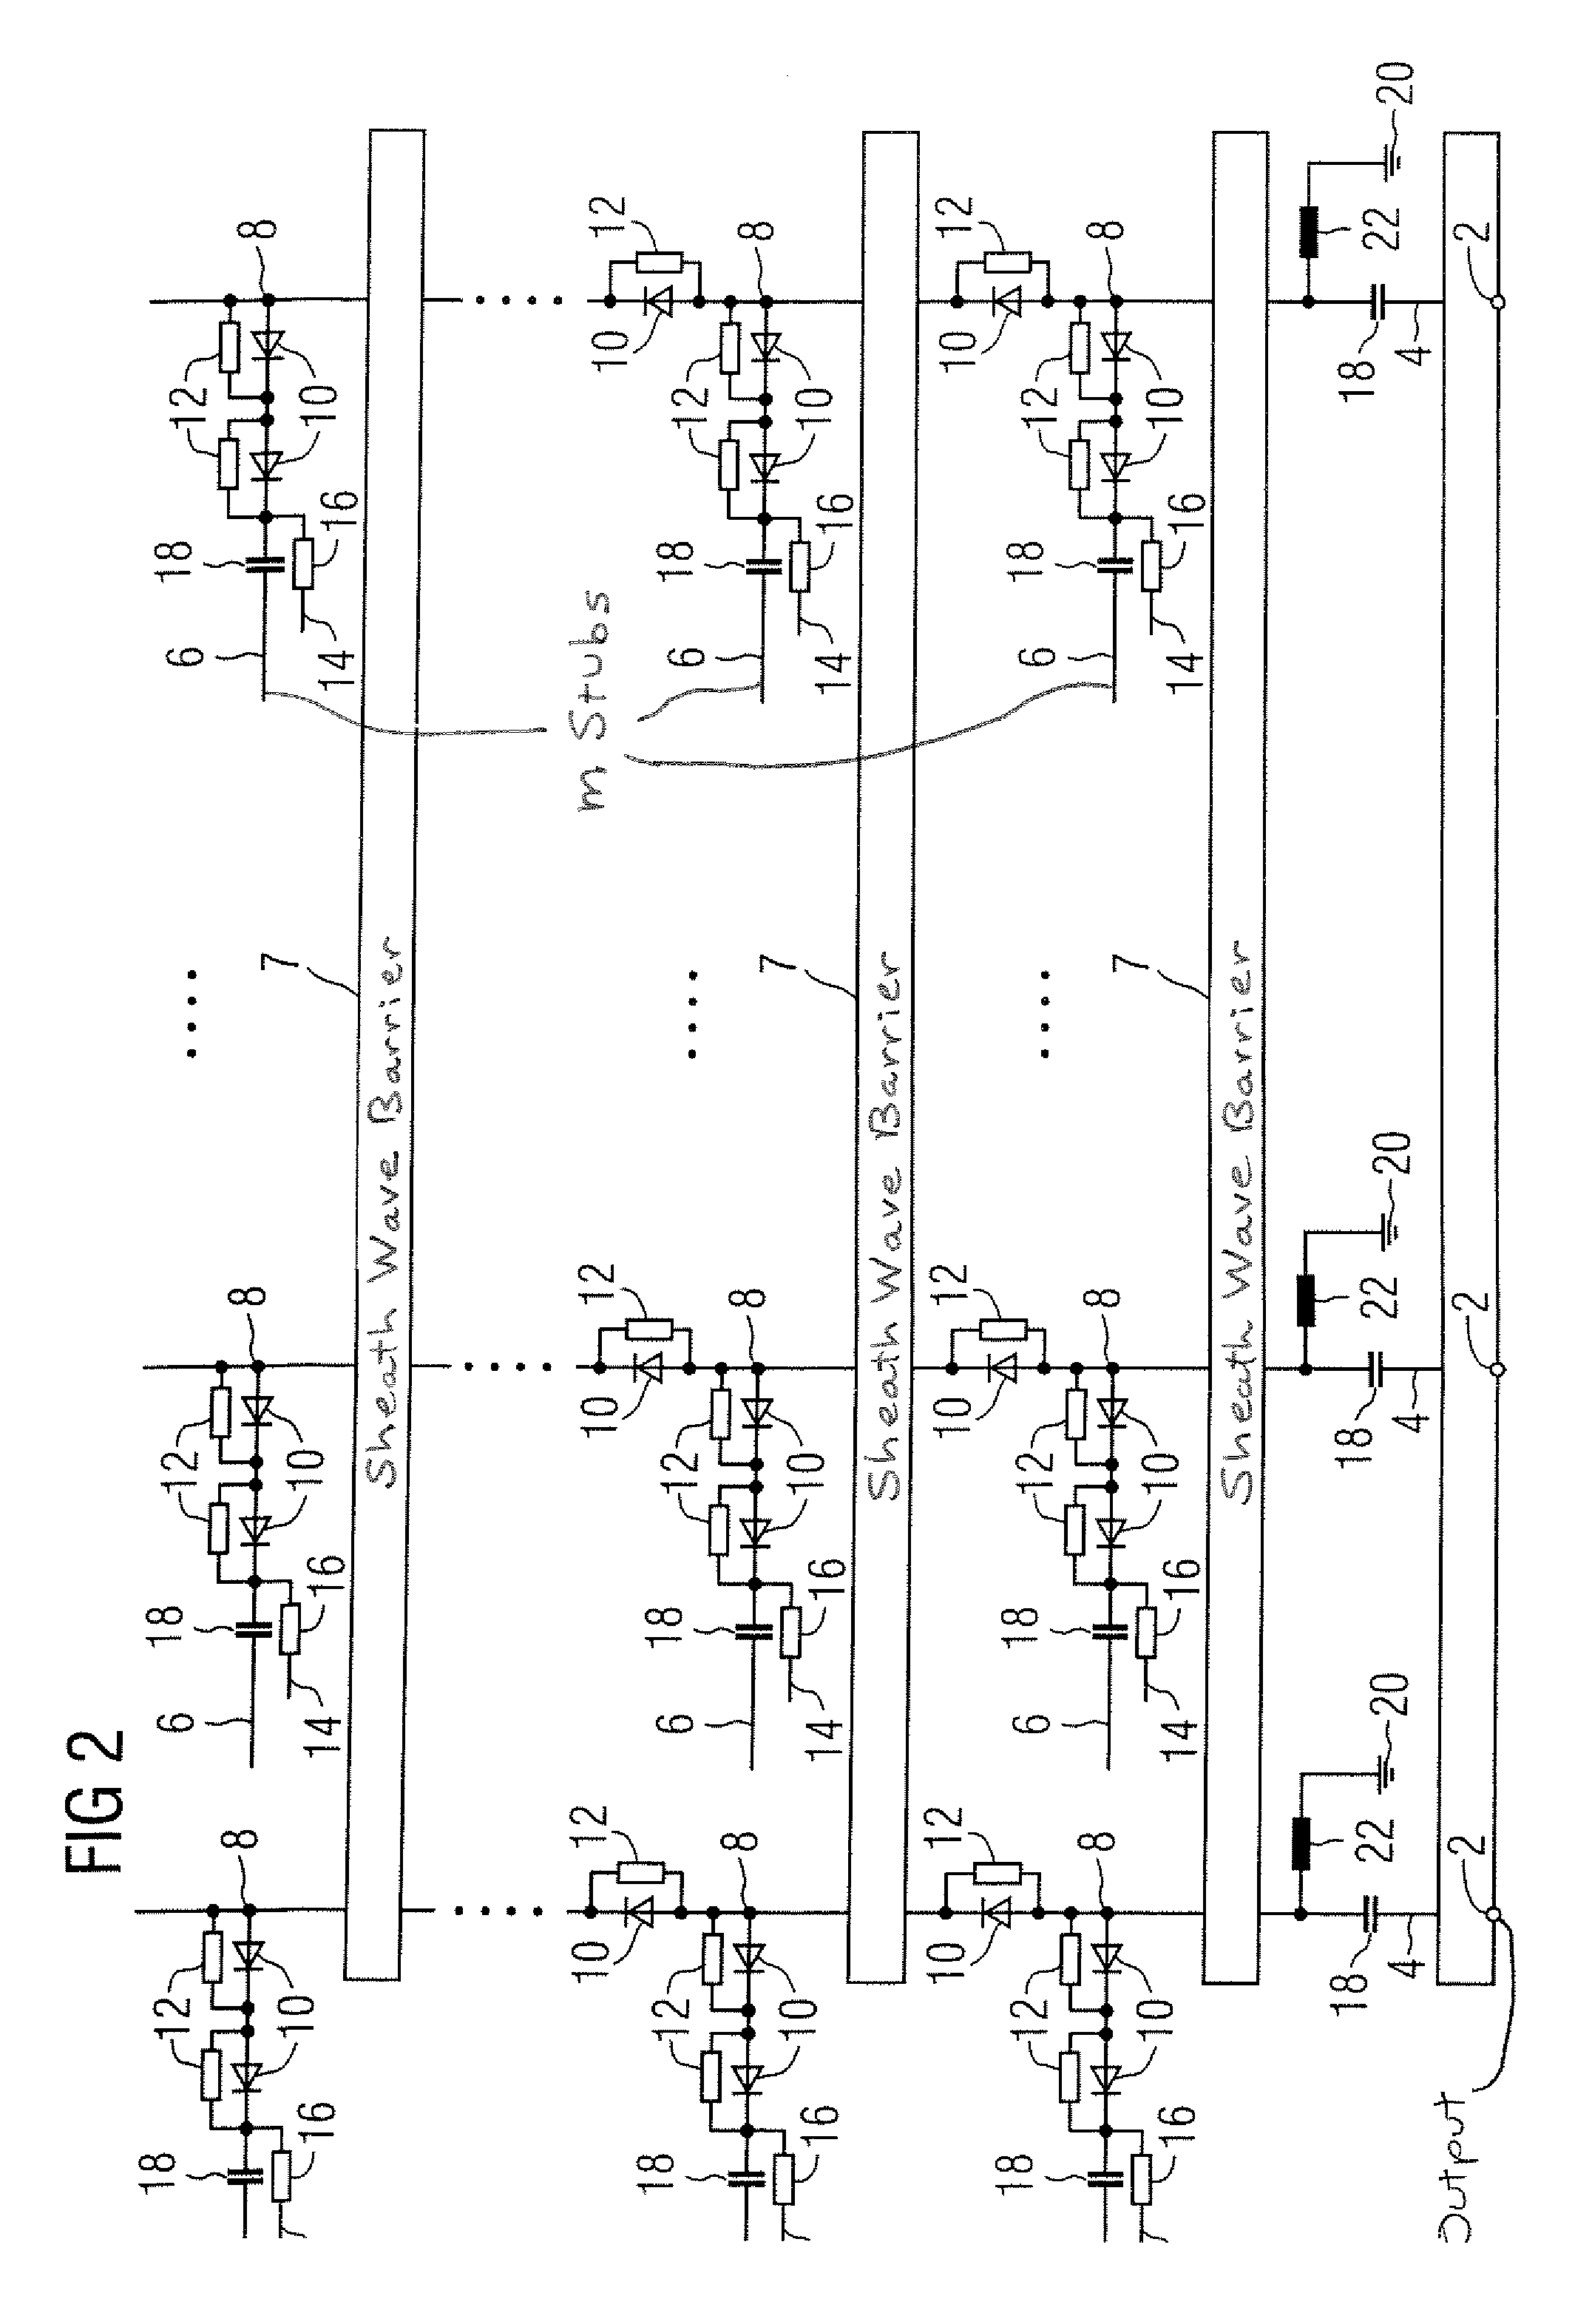 Circuit for connection of at least two signal sources with at least one signal output